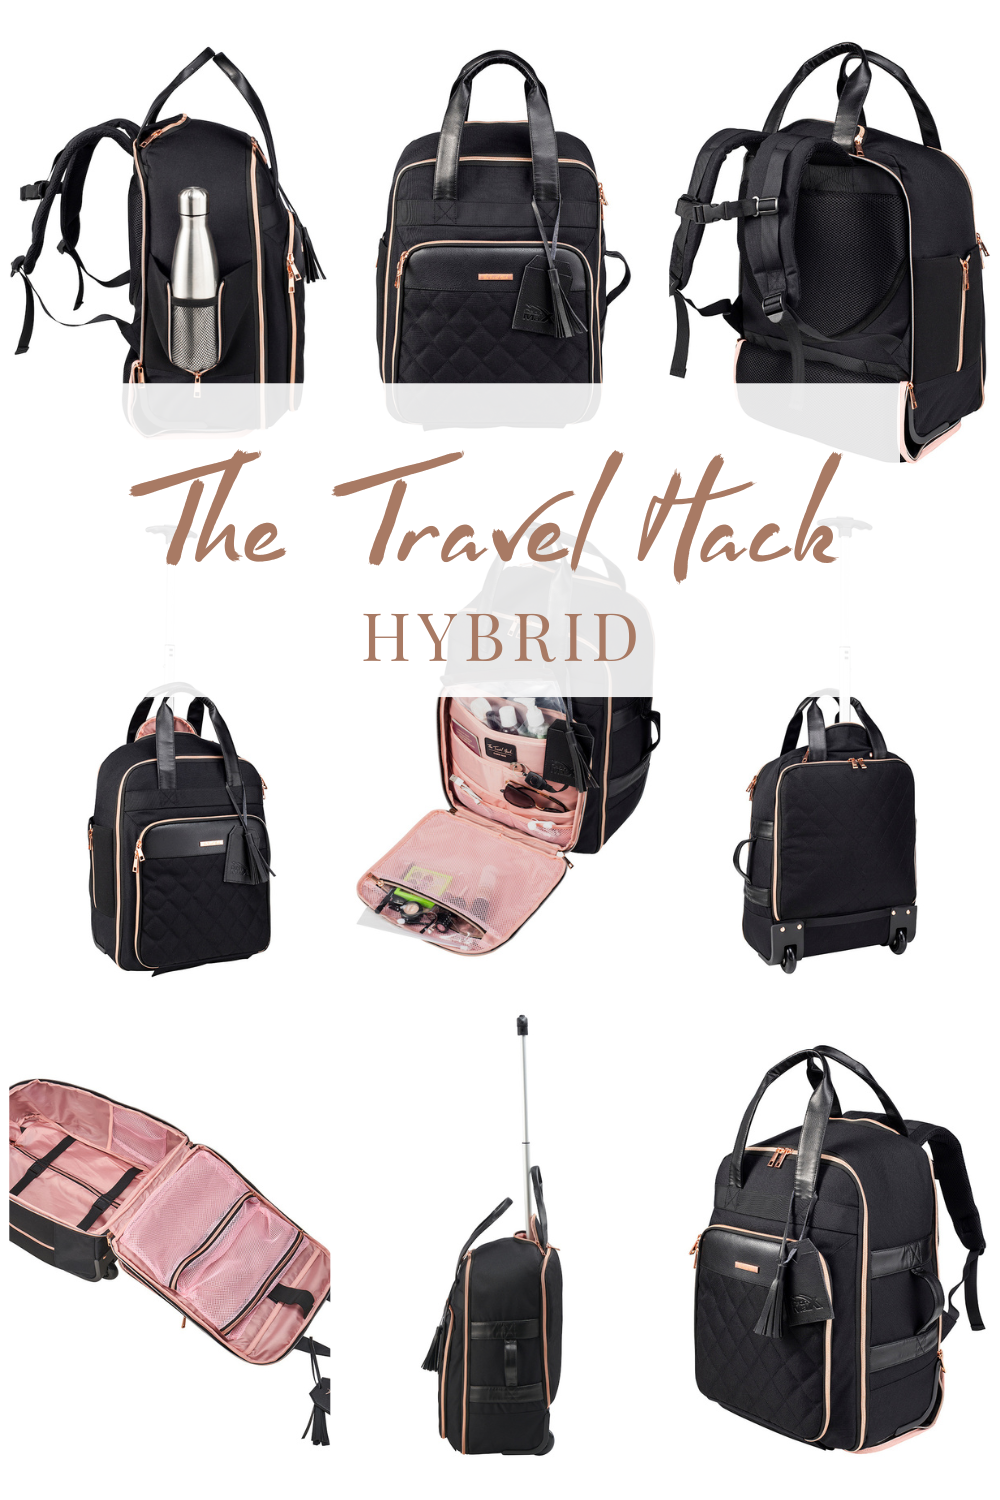 The Travel Hack Hybrid is here!